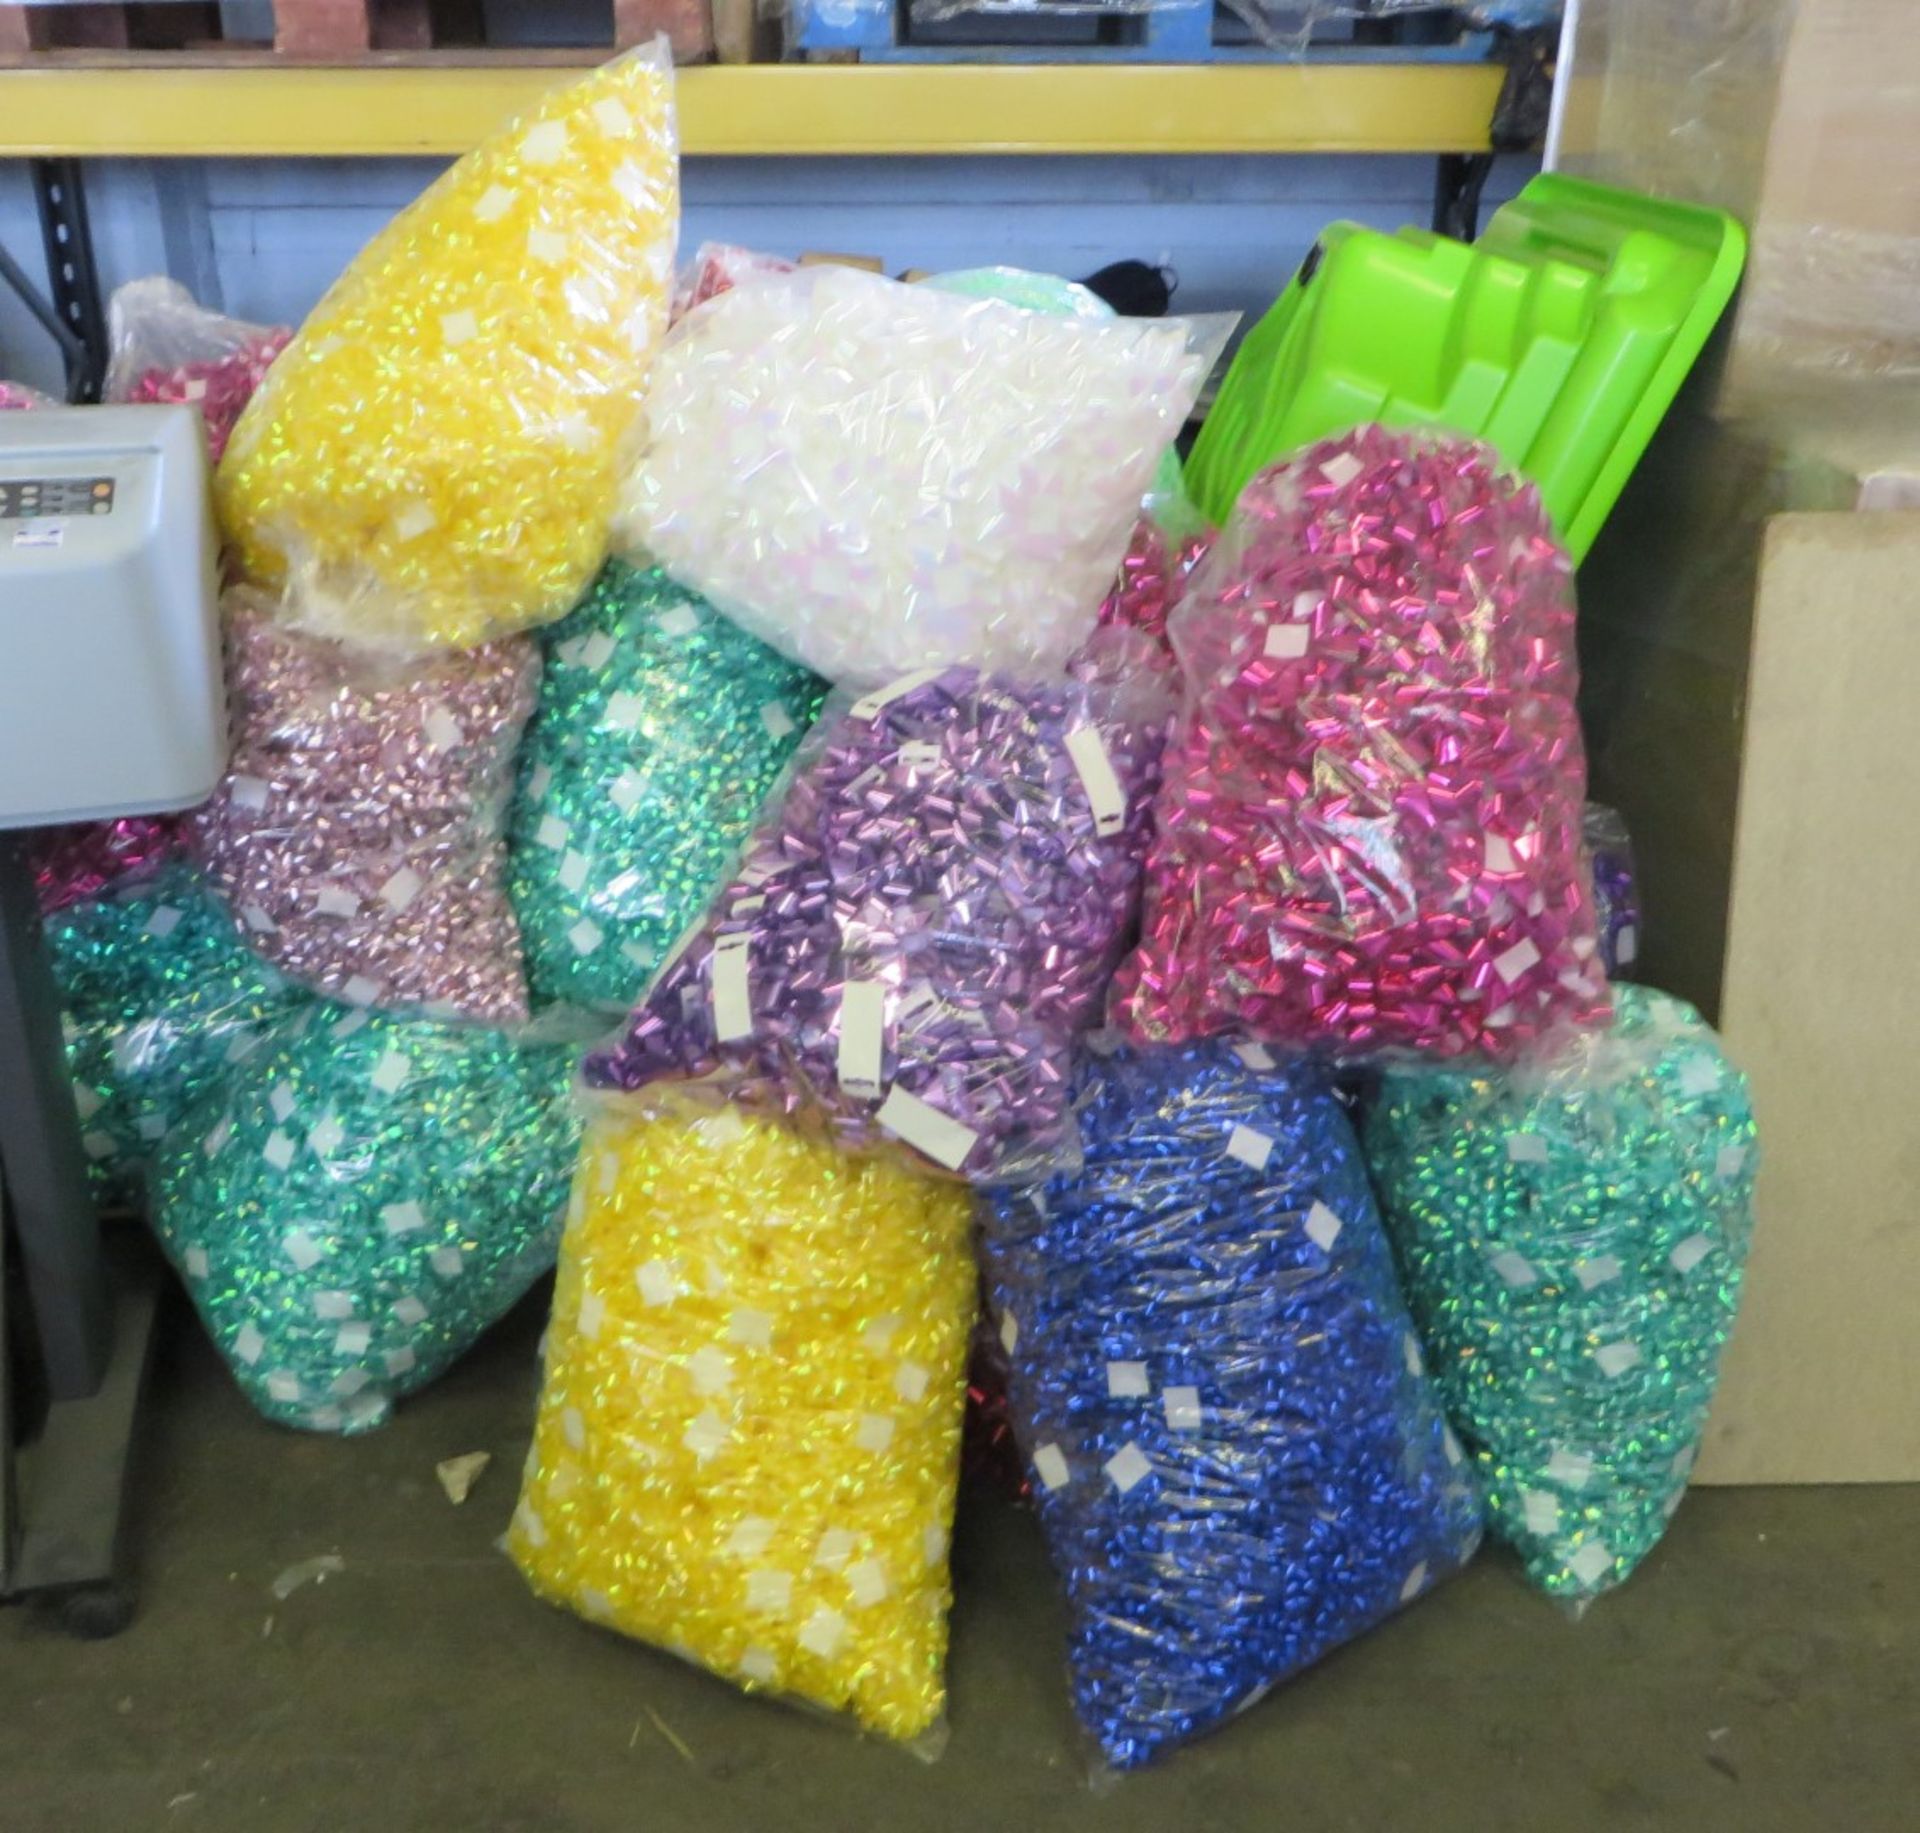 5 x Random Colour Large Bags of New Self-Adhesive Present Bows - CL185 - Ref: DSYBOWS - Location: St